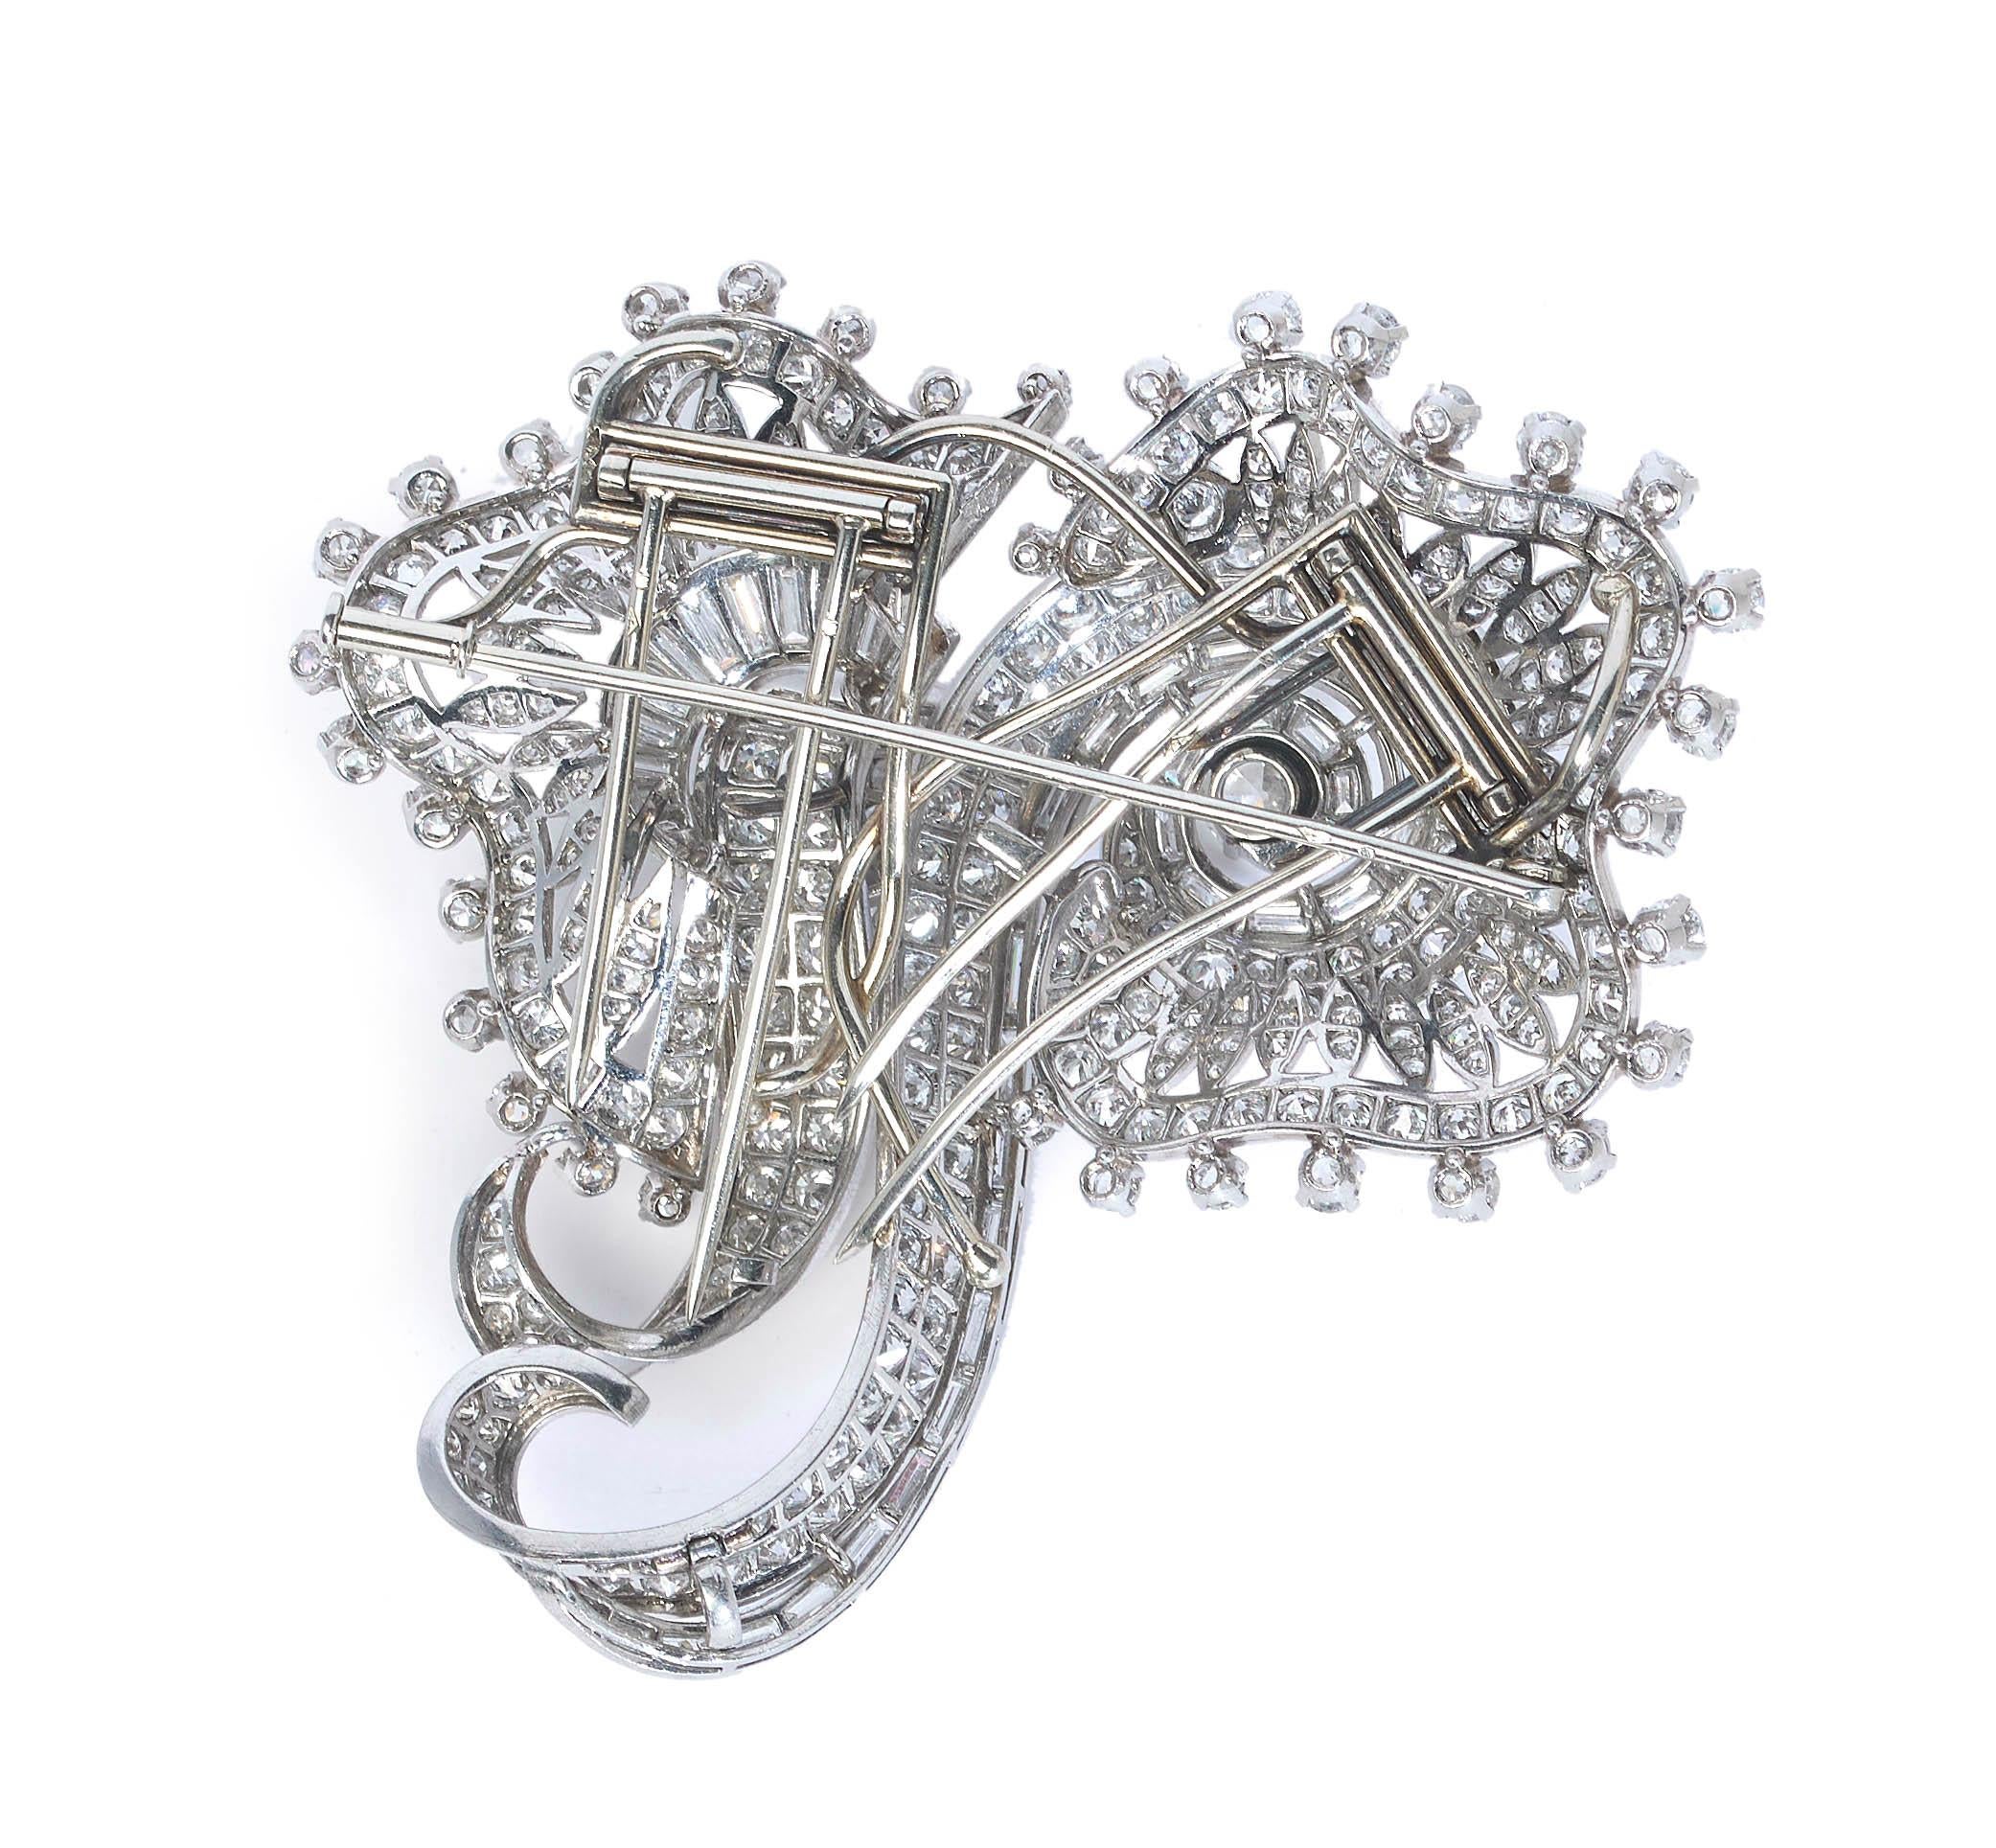 A French Art Deco diamond and platinum double clip brooch, set with round brilliant-cut, Edwardian-cut, eight-cut and baguette-cut diamonds, in an abstract design, mounted in platinum, with French dog head marks. The clip fittings are made of white